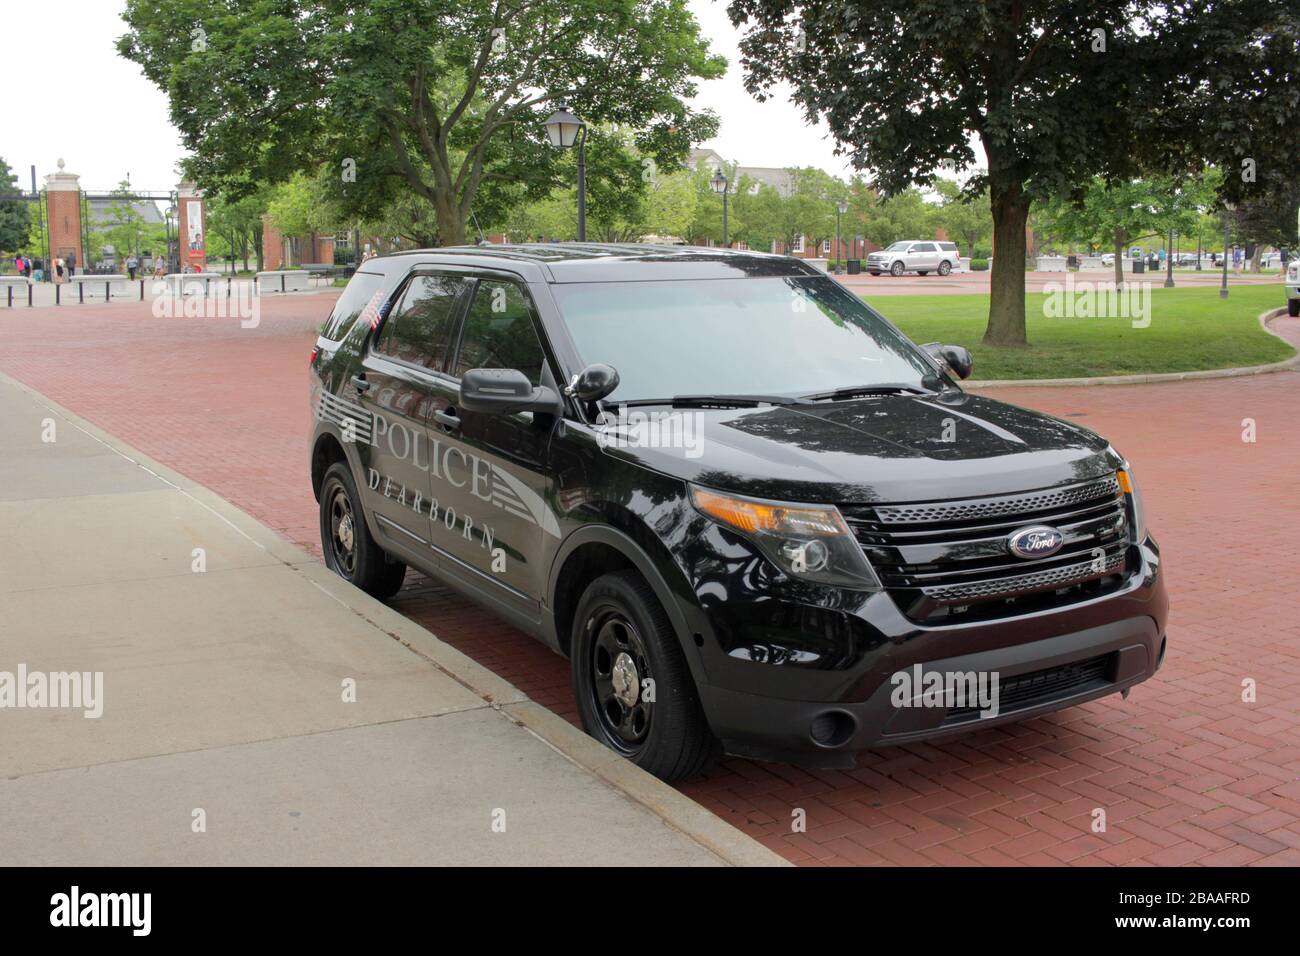 Dearborn Police Department vehicle outside the Henry Ford Museum, Dearborn, Michigan, USA Stock Photo